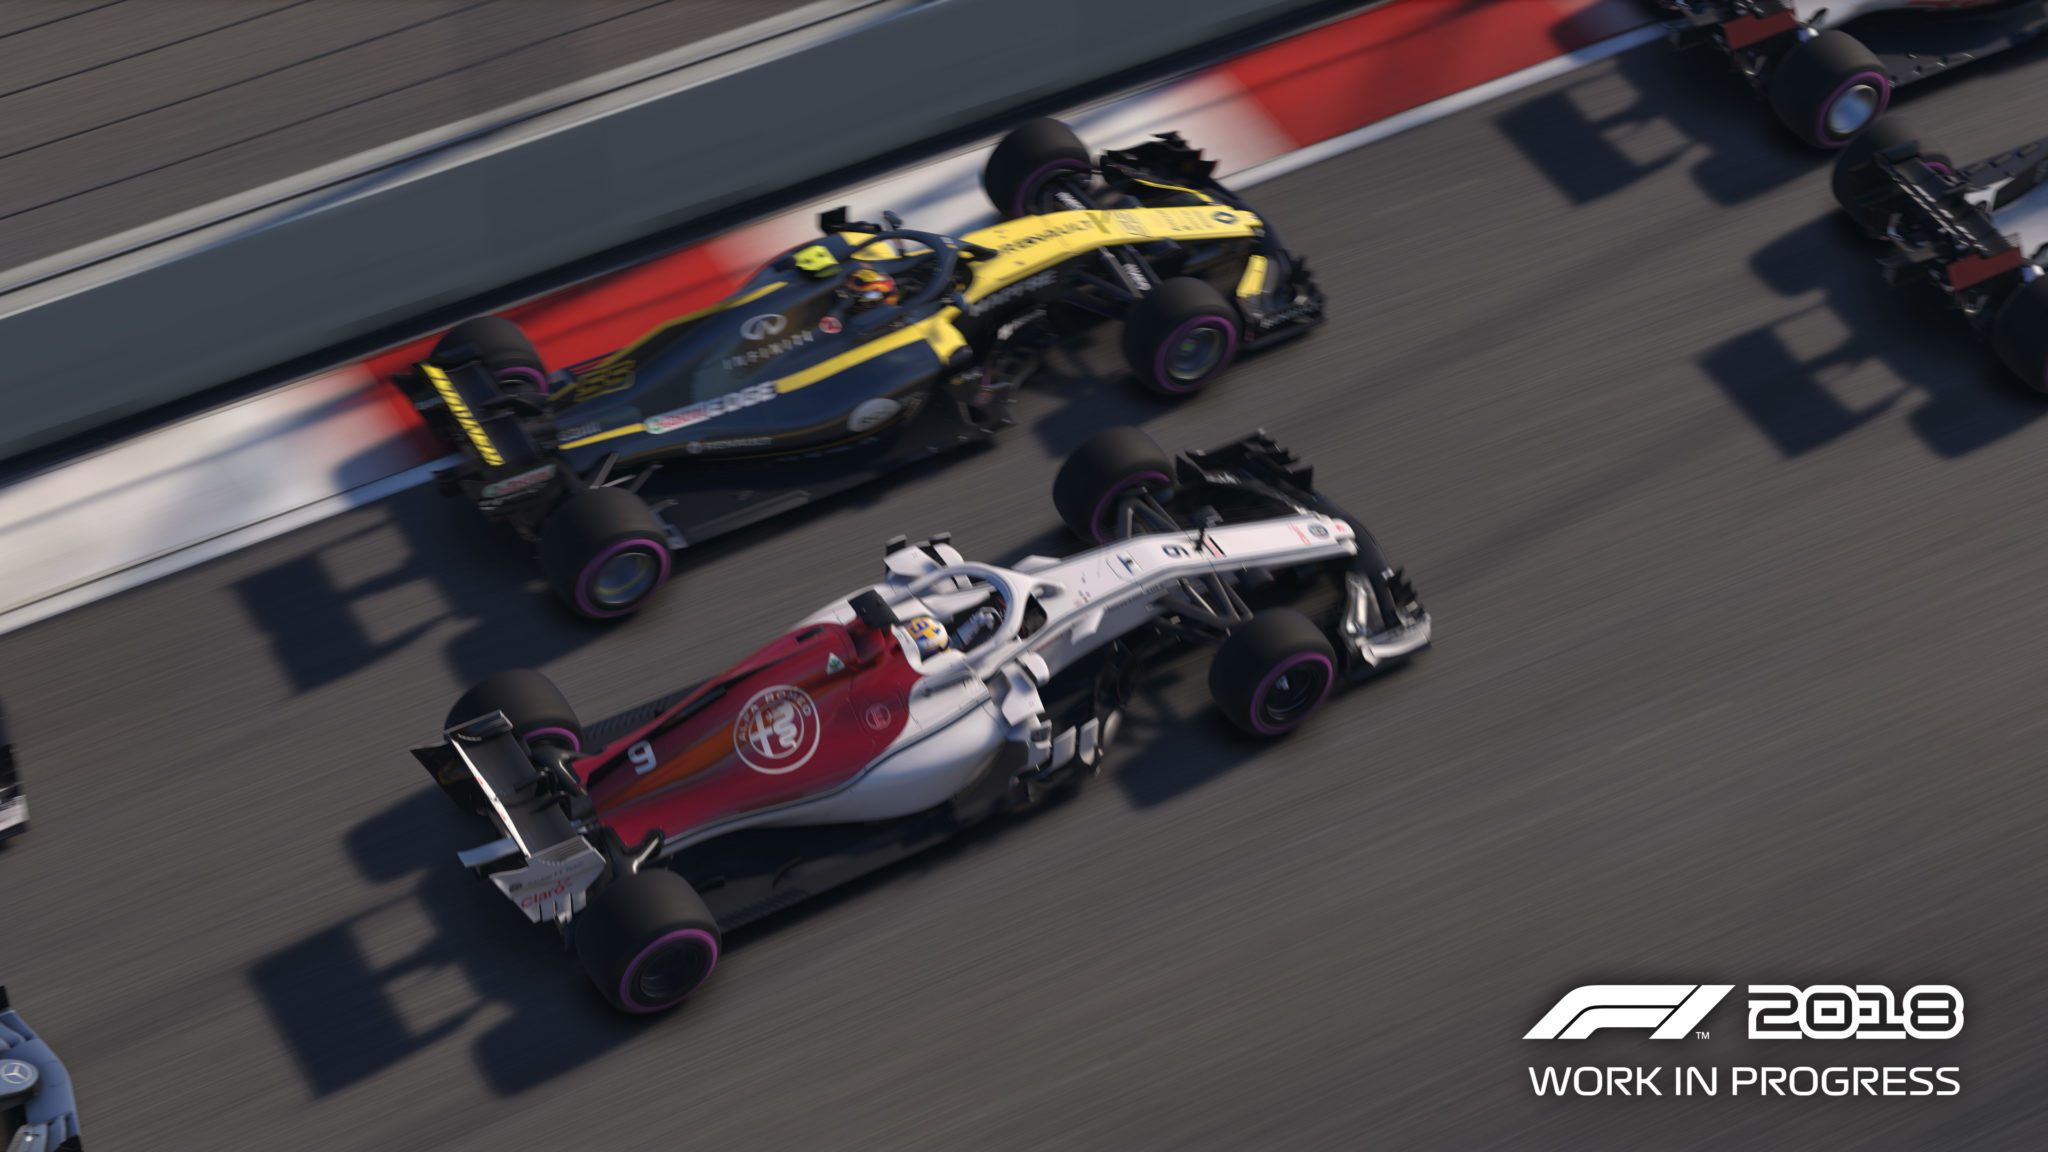 F1 2018 Will Get an Online Driver Ranking System Too